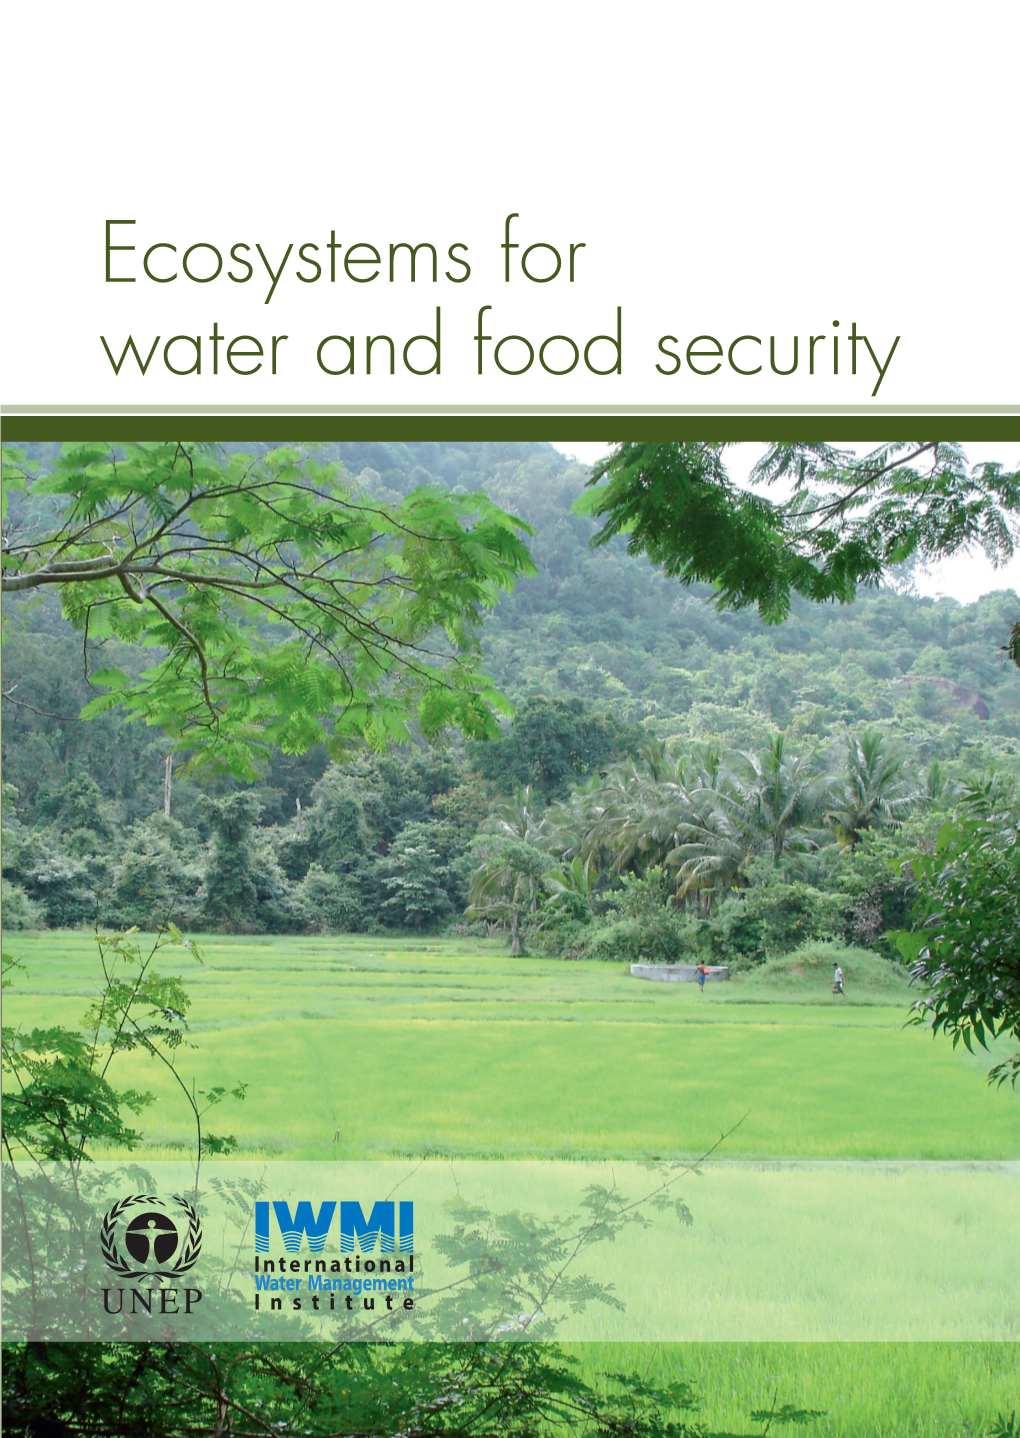 Ecosystems for Water and Food Security